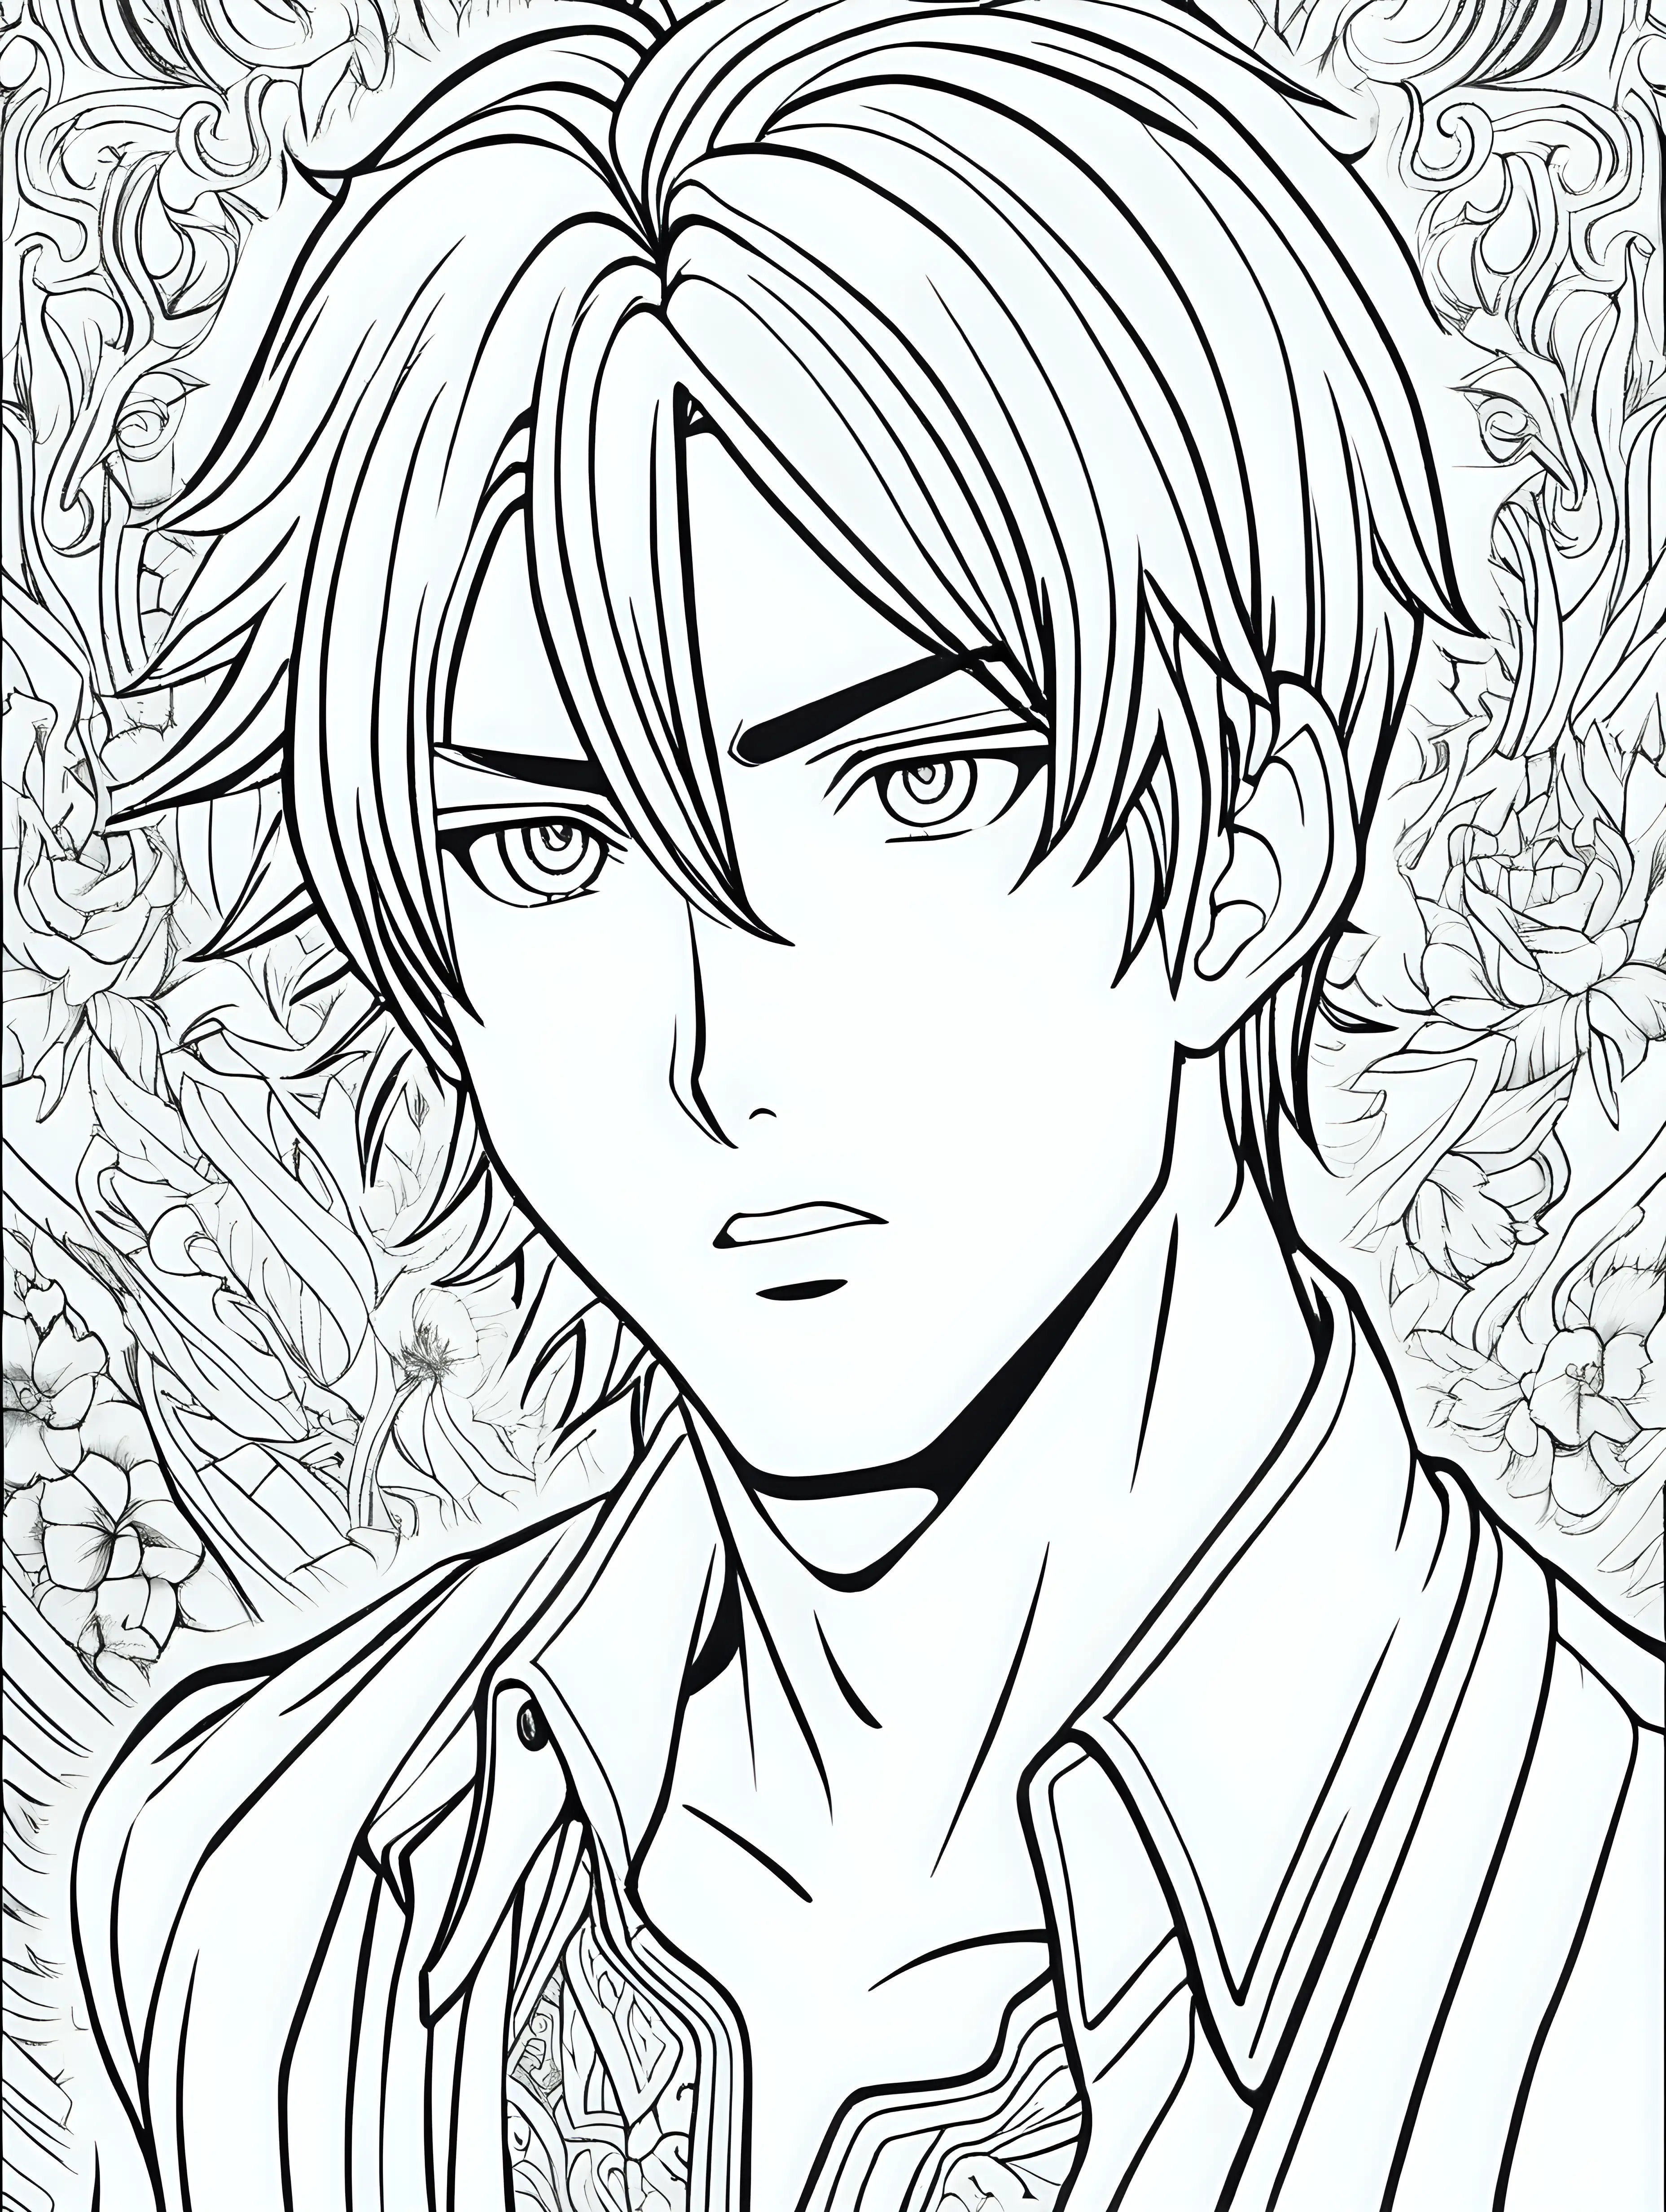 MangaStyle Adult Coloring Book Page Vibrant Portrait of a Young Man